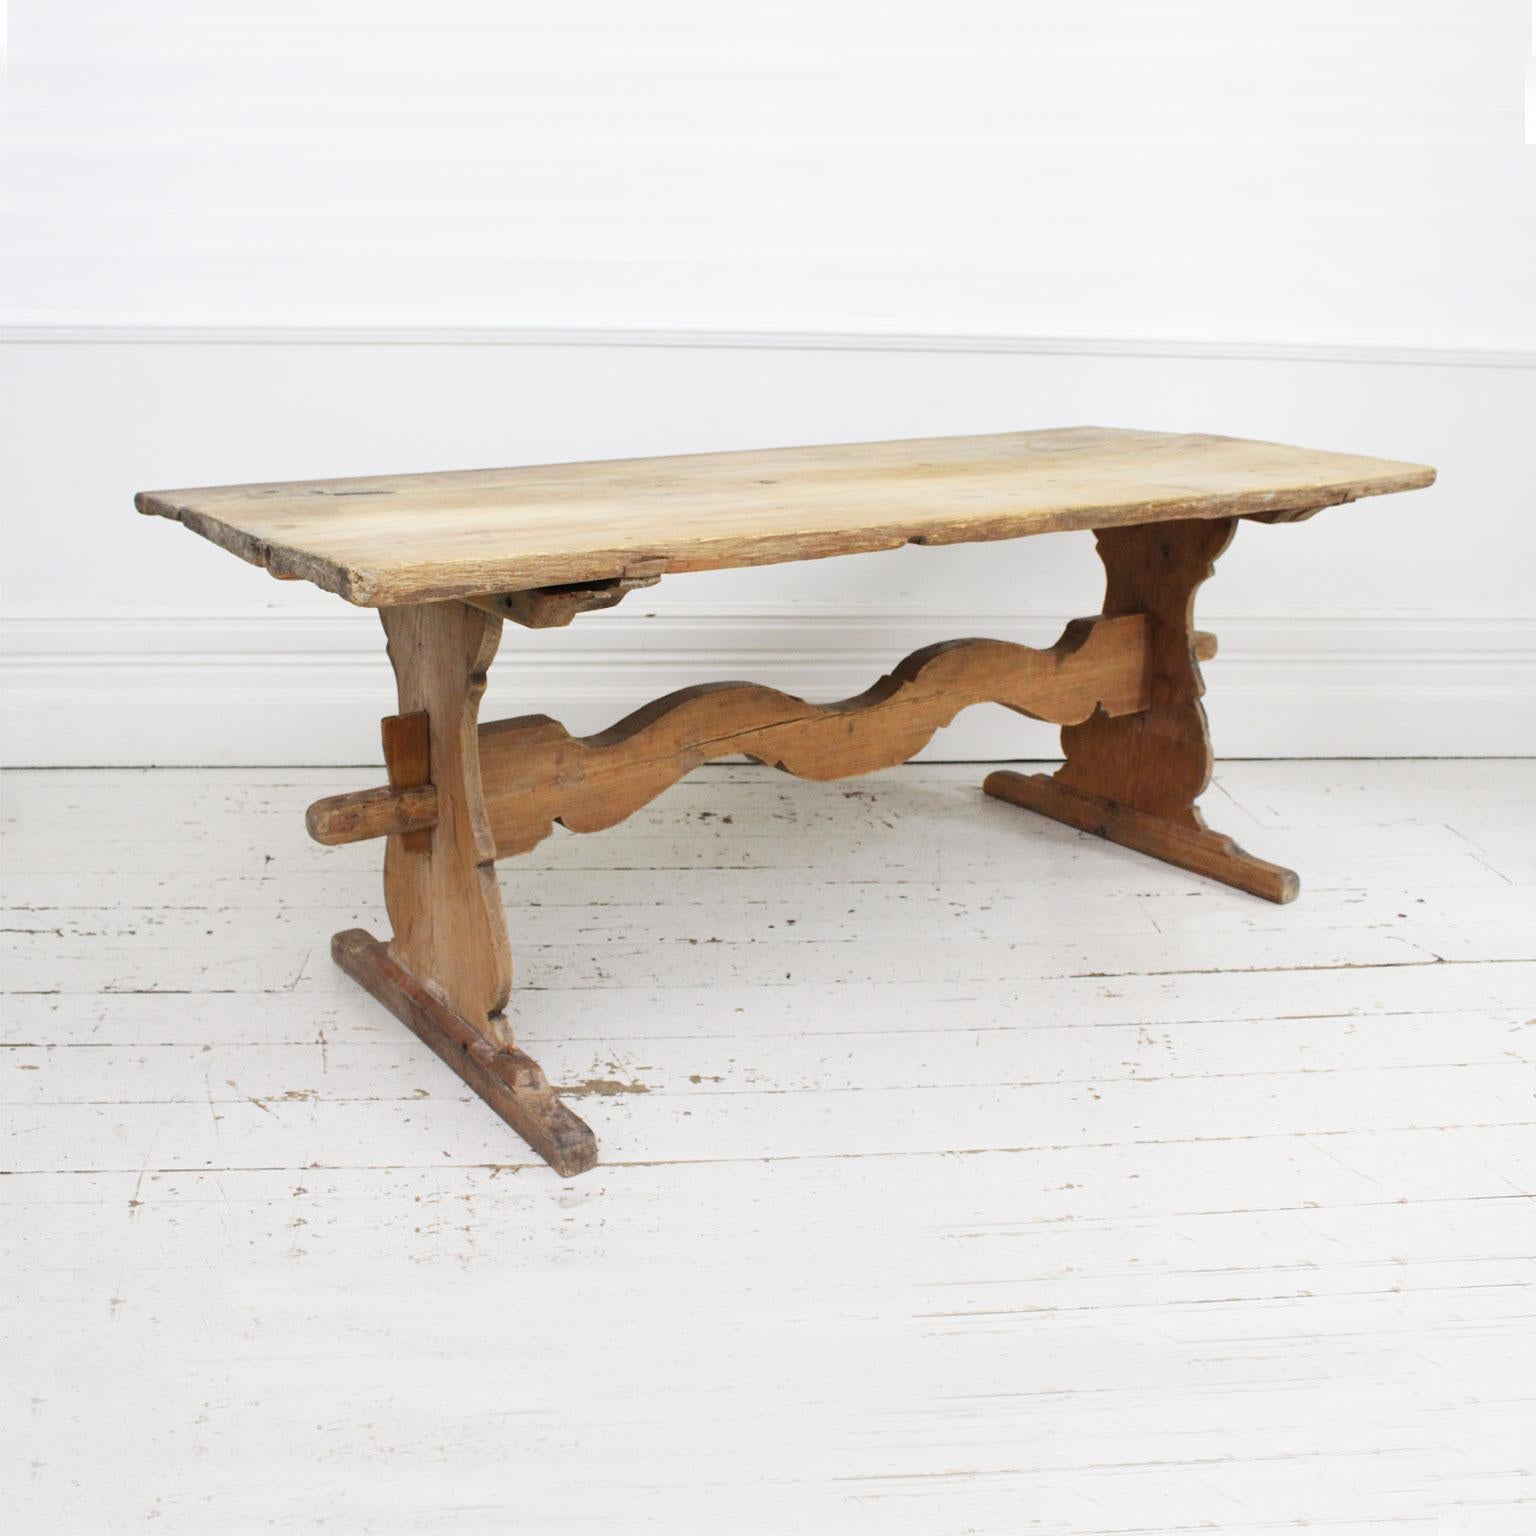 This is a very rare Swedish trestle table - mainly because of it's unique and distinctive shaped rail. It dates from circa 1790-1800. Typical early features include the top with it's axed boards underneath and the shaped end supports. In practical